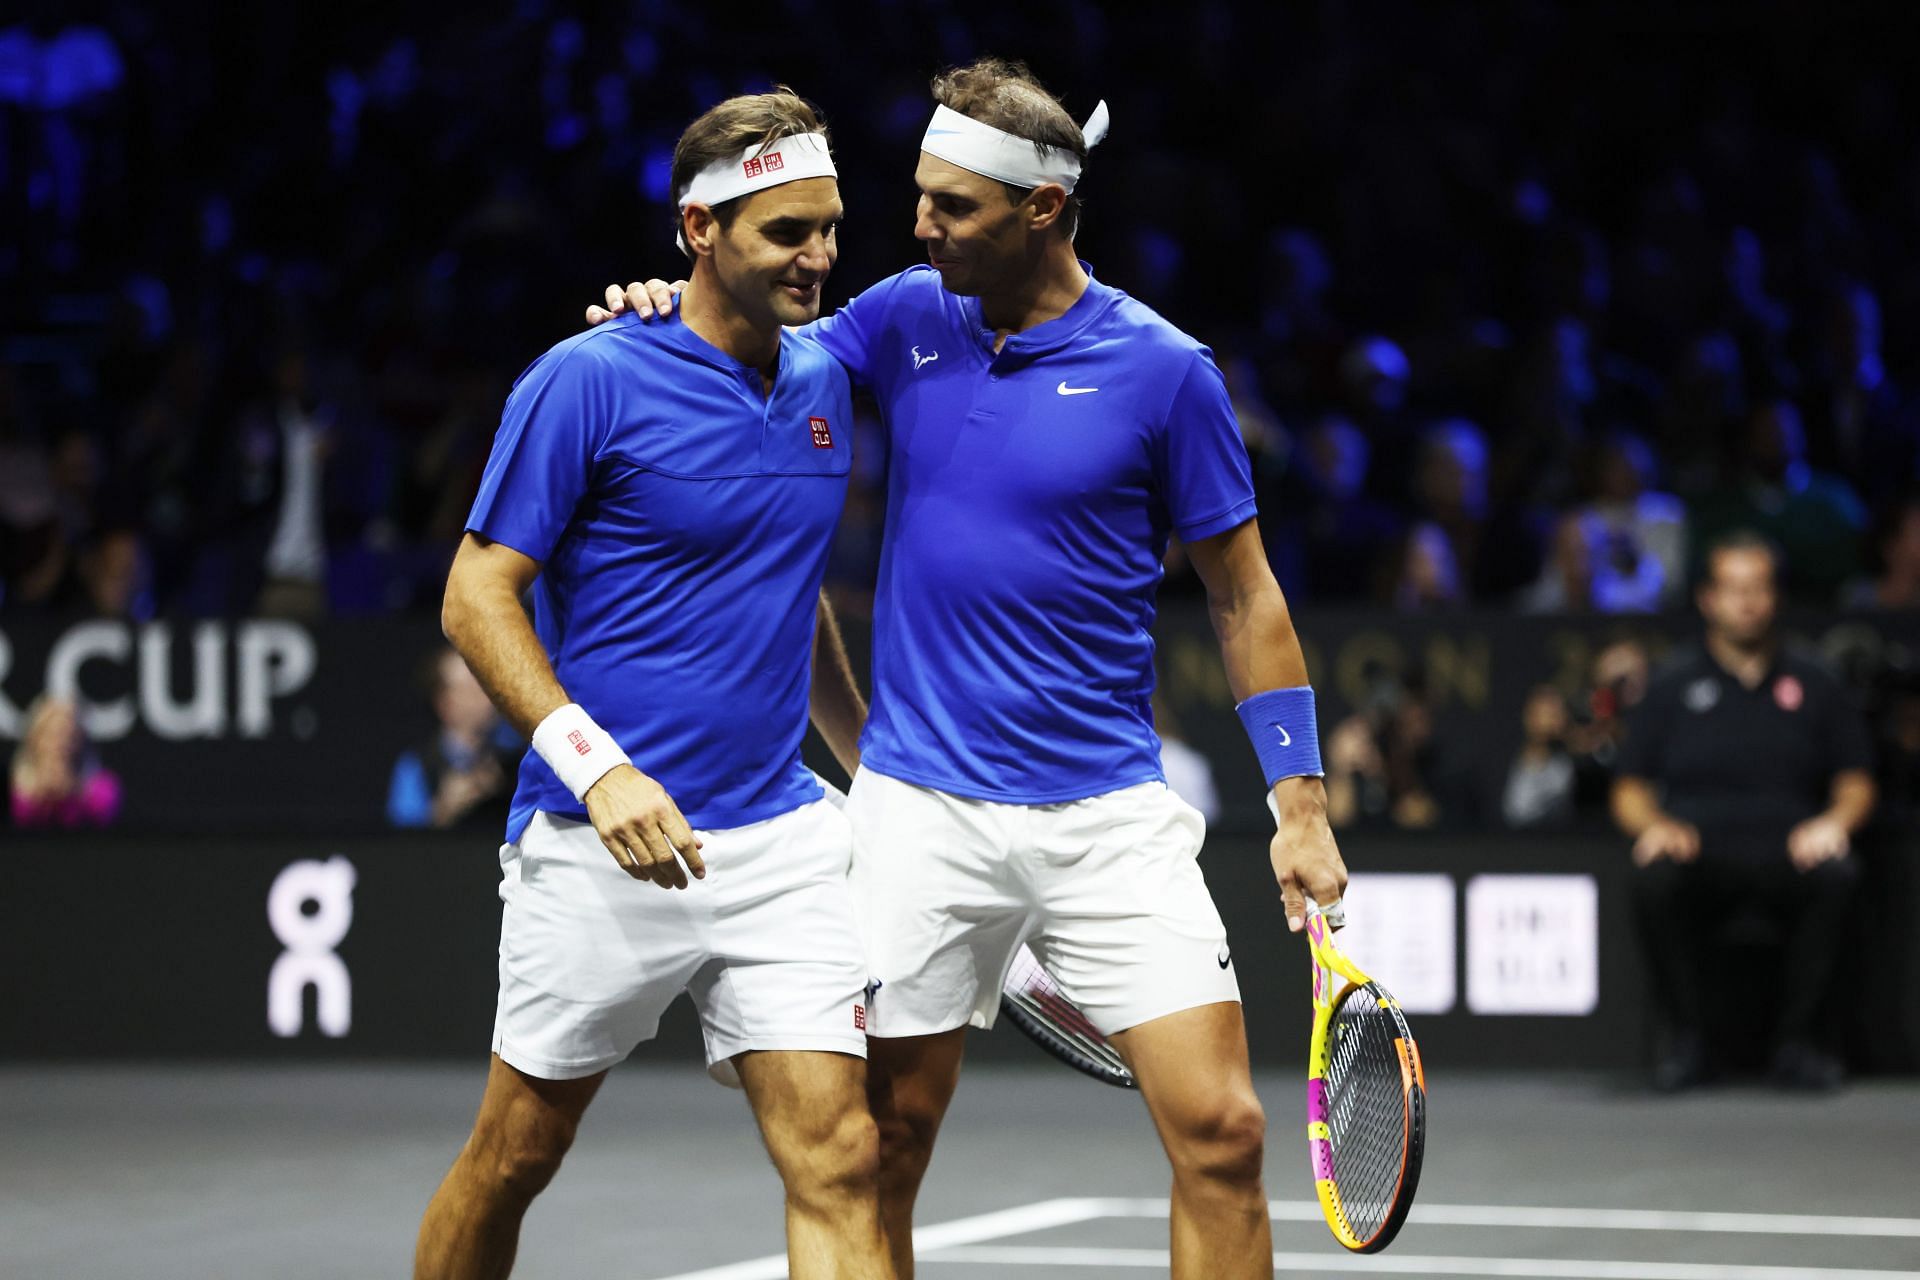 The legendary duo pictured at the 2022 Laver Cup